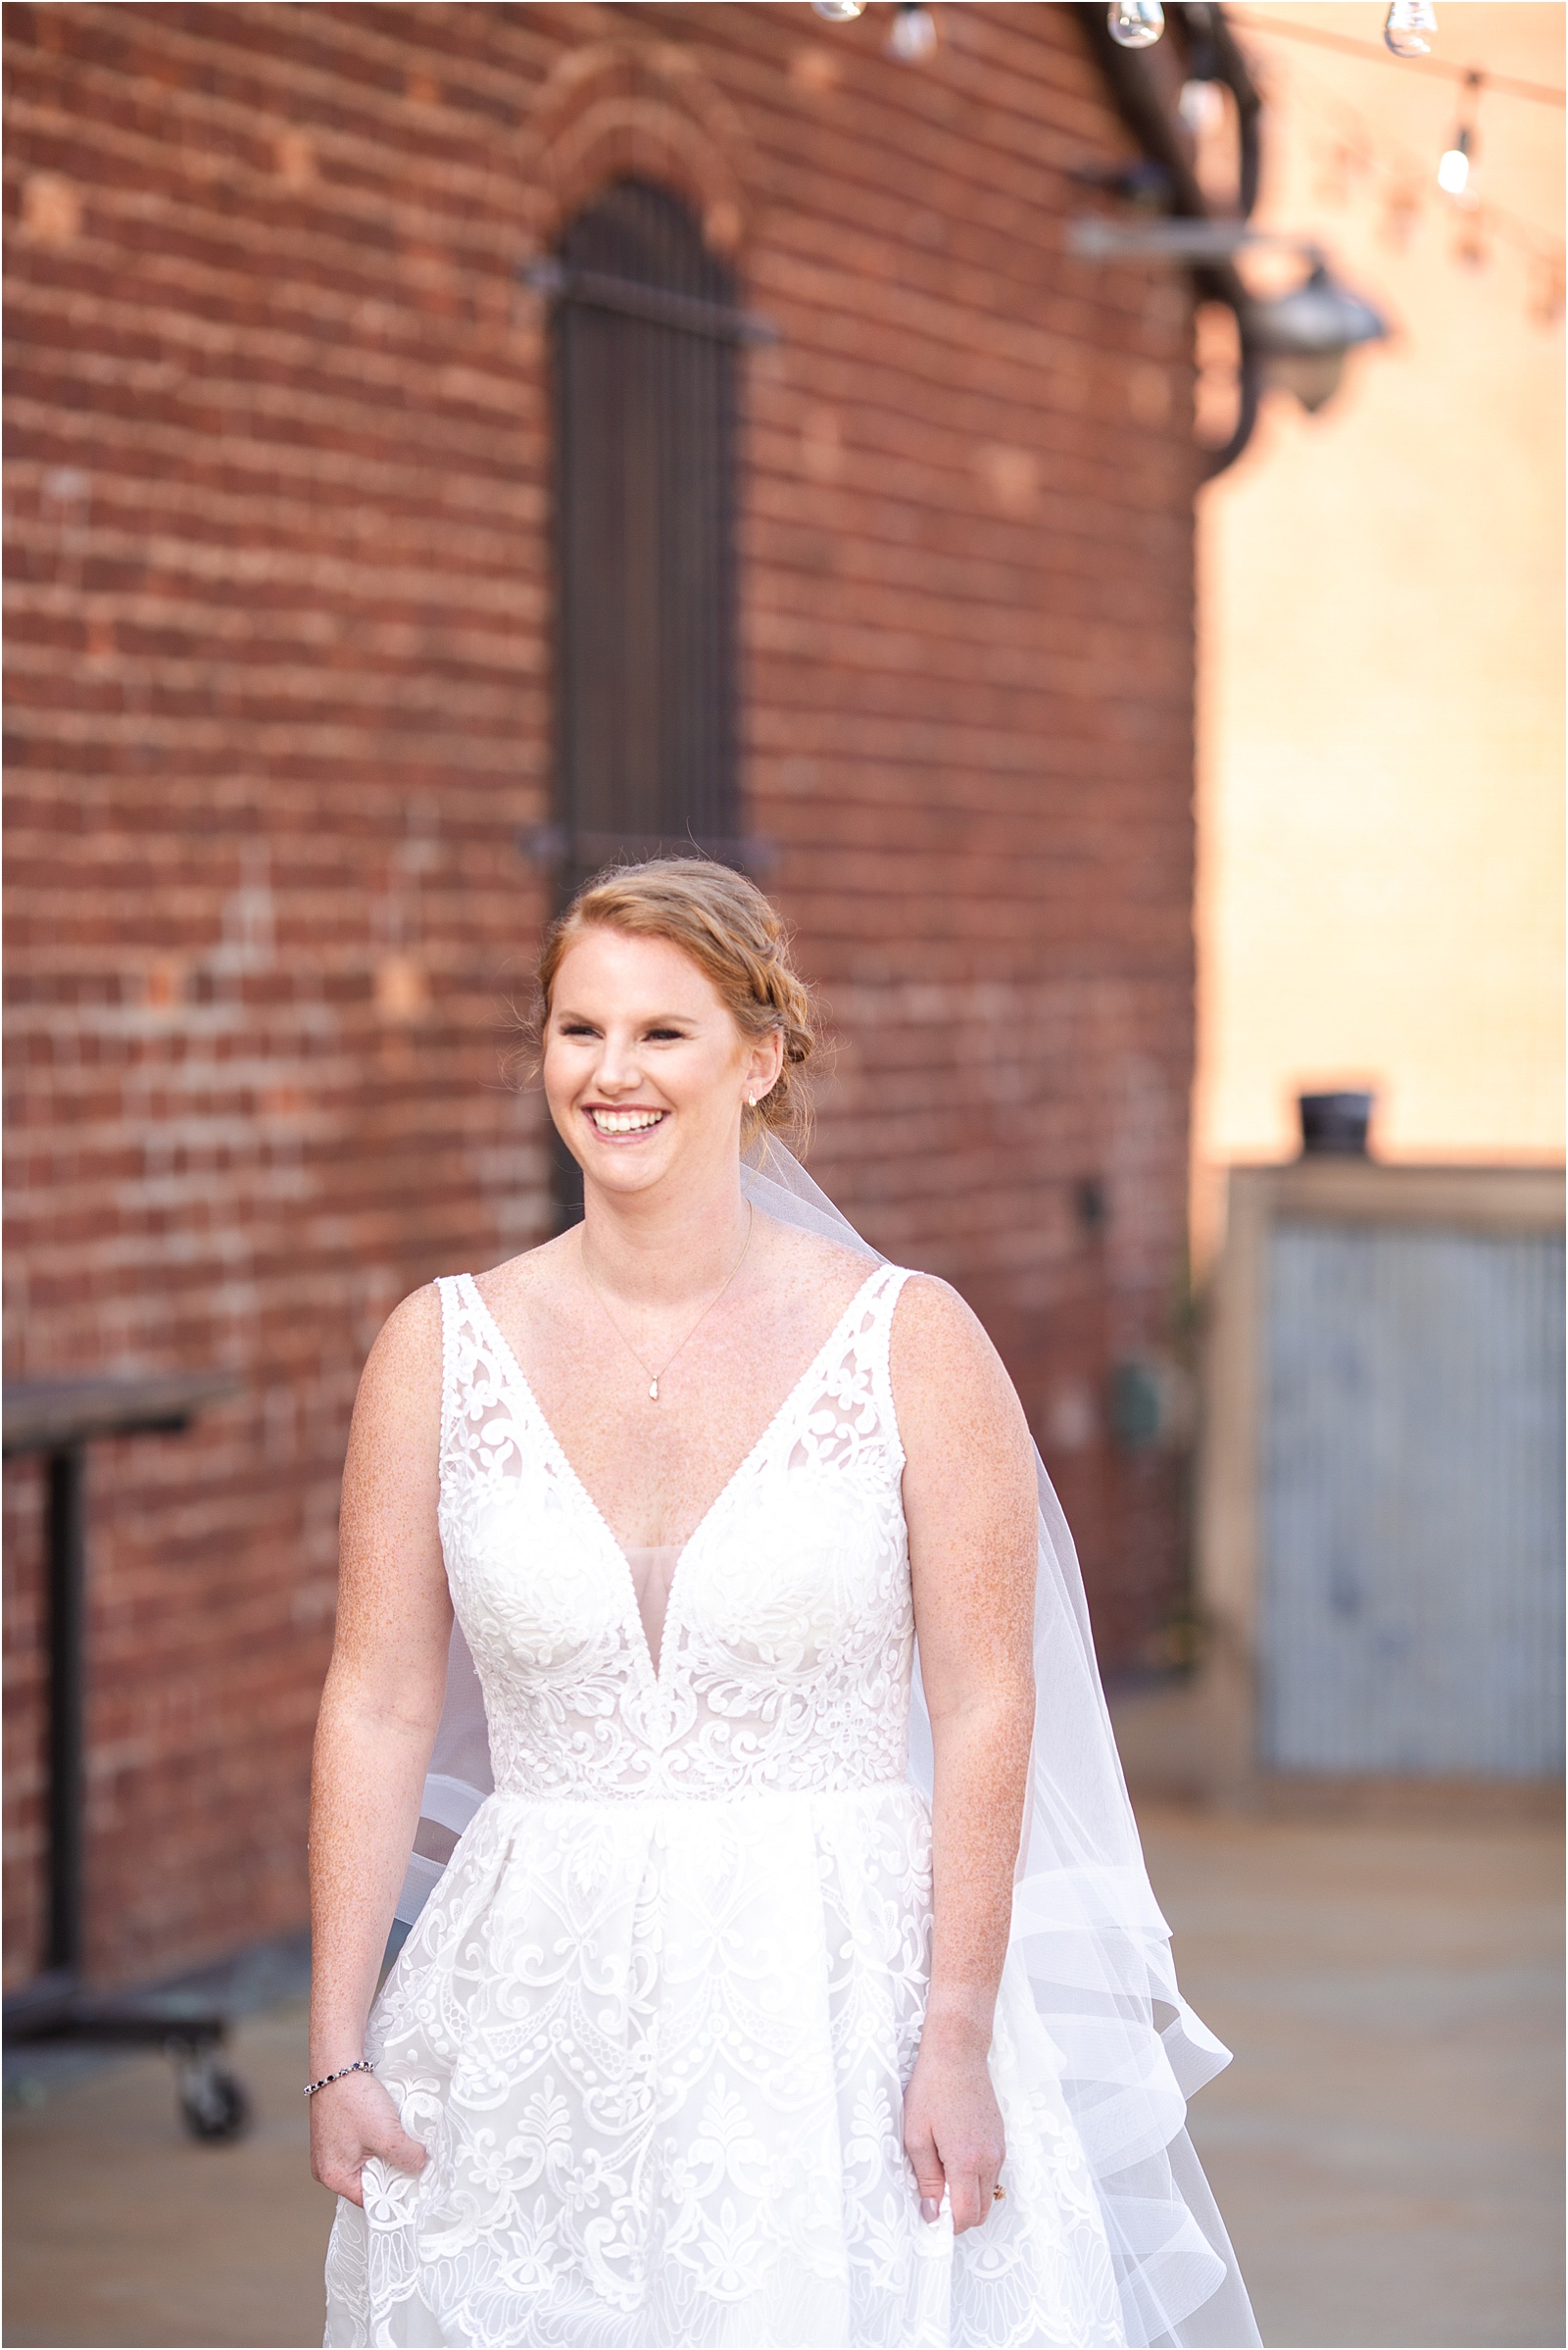 bride walking towards groom with brick wall in the background